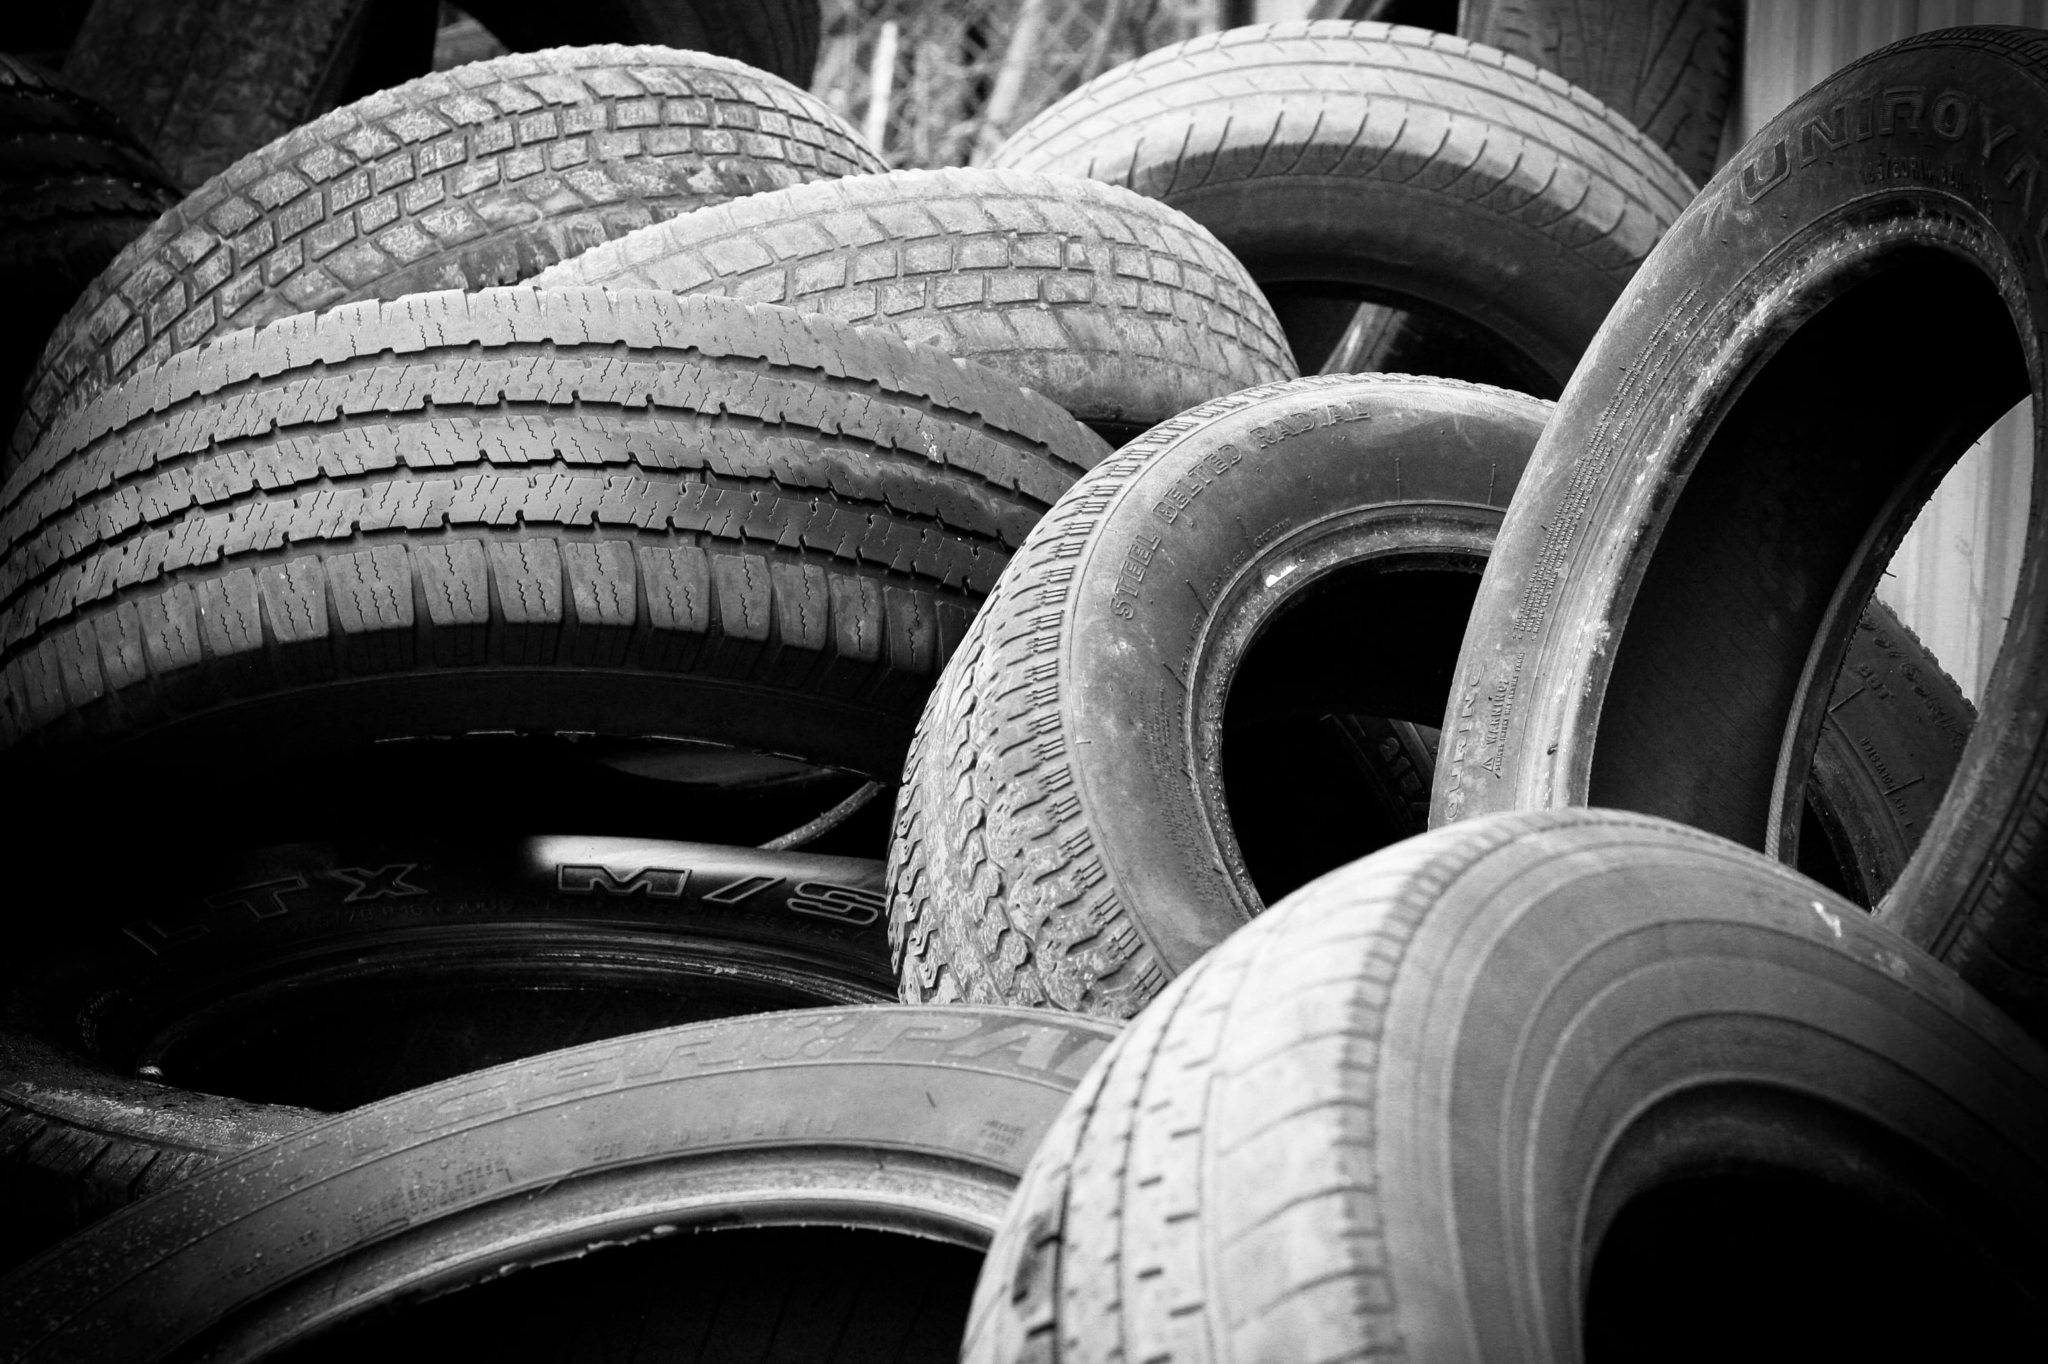 UK’s largest tyre recycling gathering discusses exports to India, T8 exemptions and regulatory reform